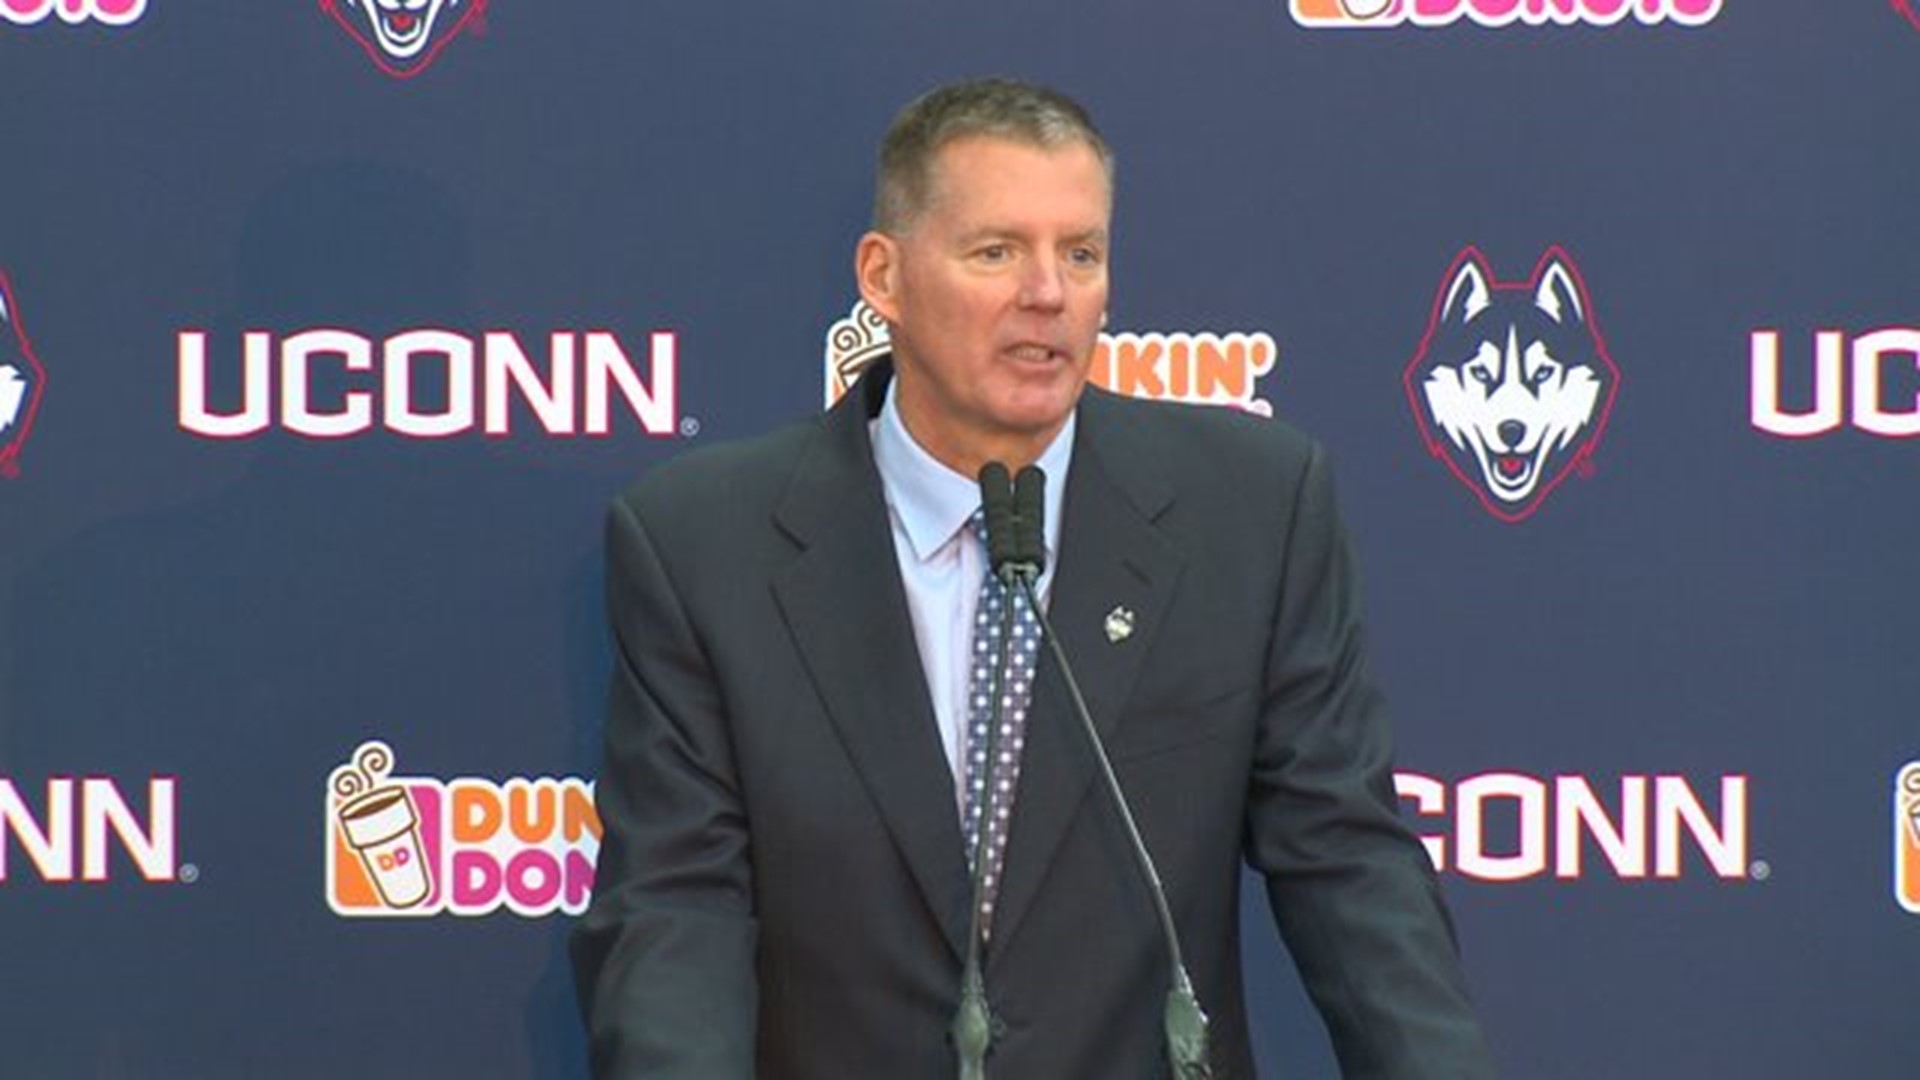 UConn community excited as new football coach announced